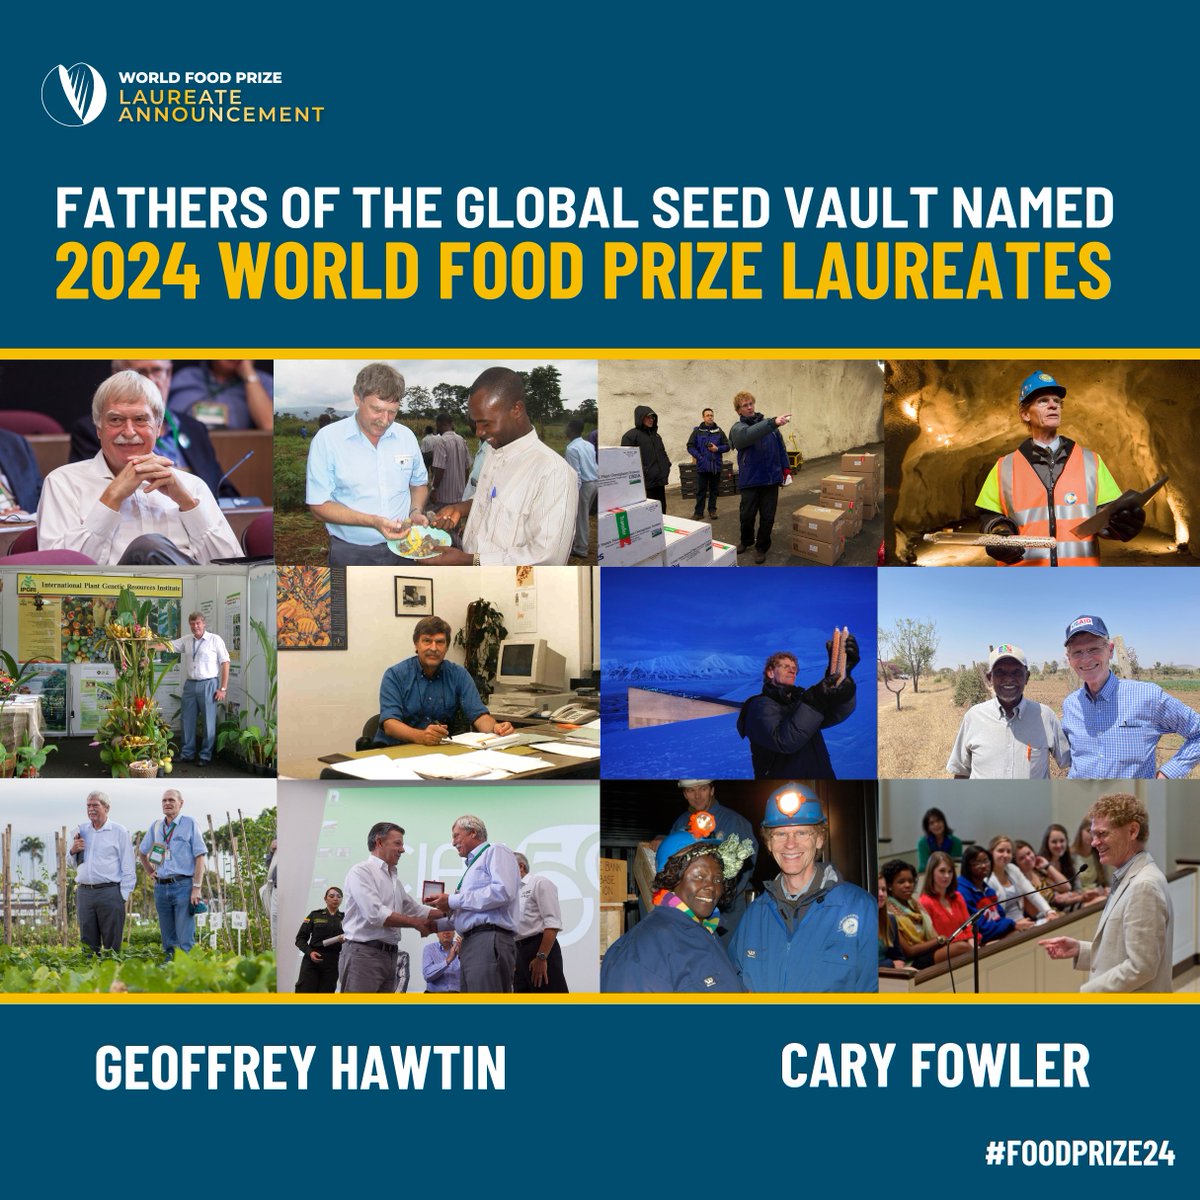 Congratulations to Dr. Geoffrey Hawtin and Dr. Cary Fowler on being named the 2024 World Food Prize Laureates. Considered among the foremost experts in their field, they shaped the global system for protecting, sharing and utilizing crop biodiversity for the benefit of humanity.